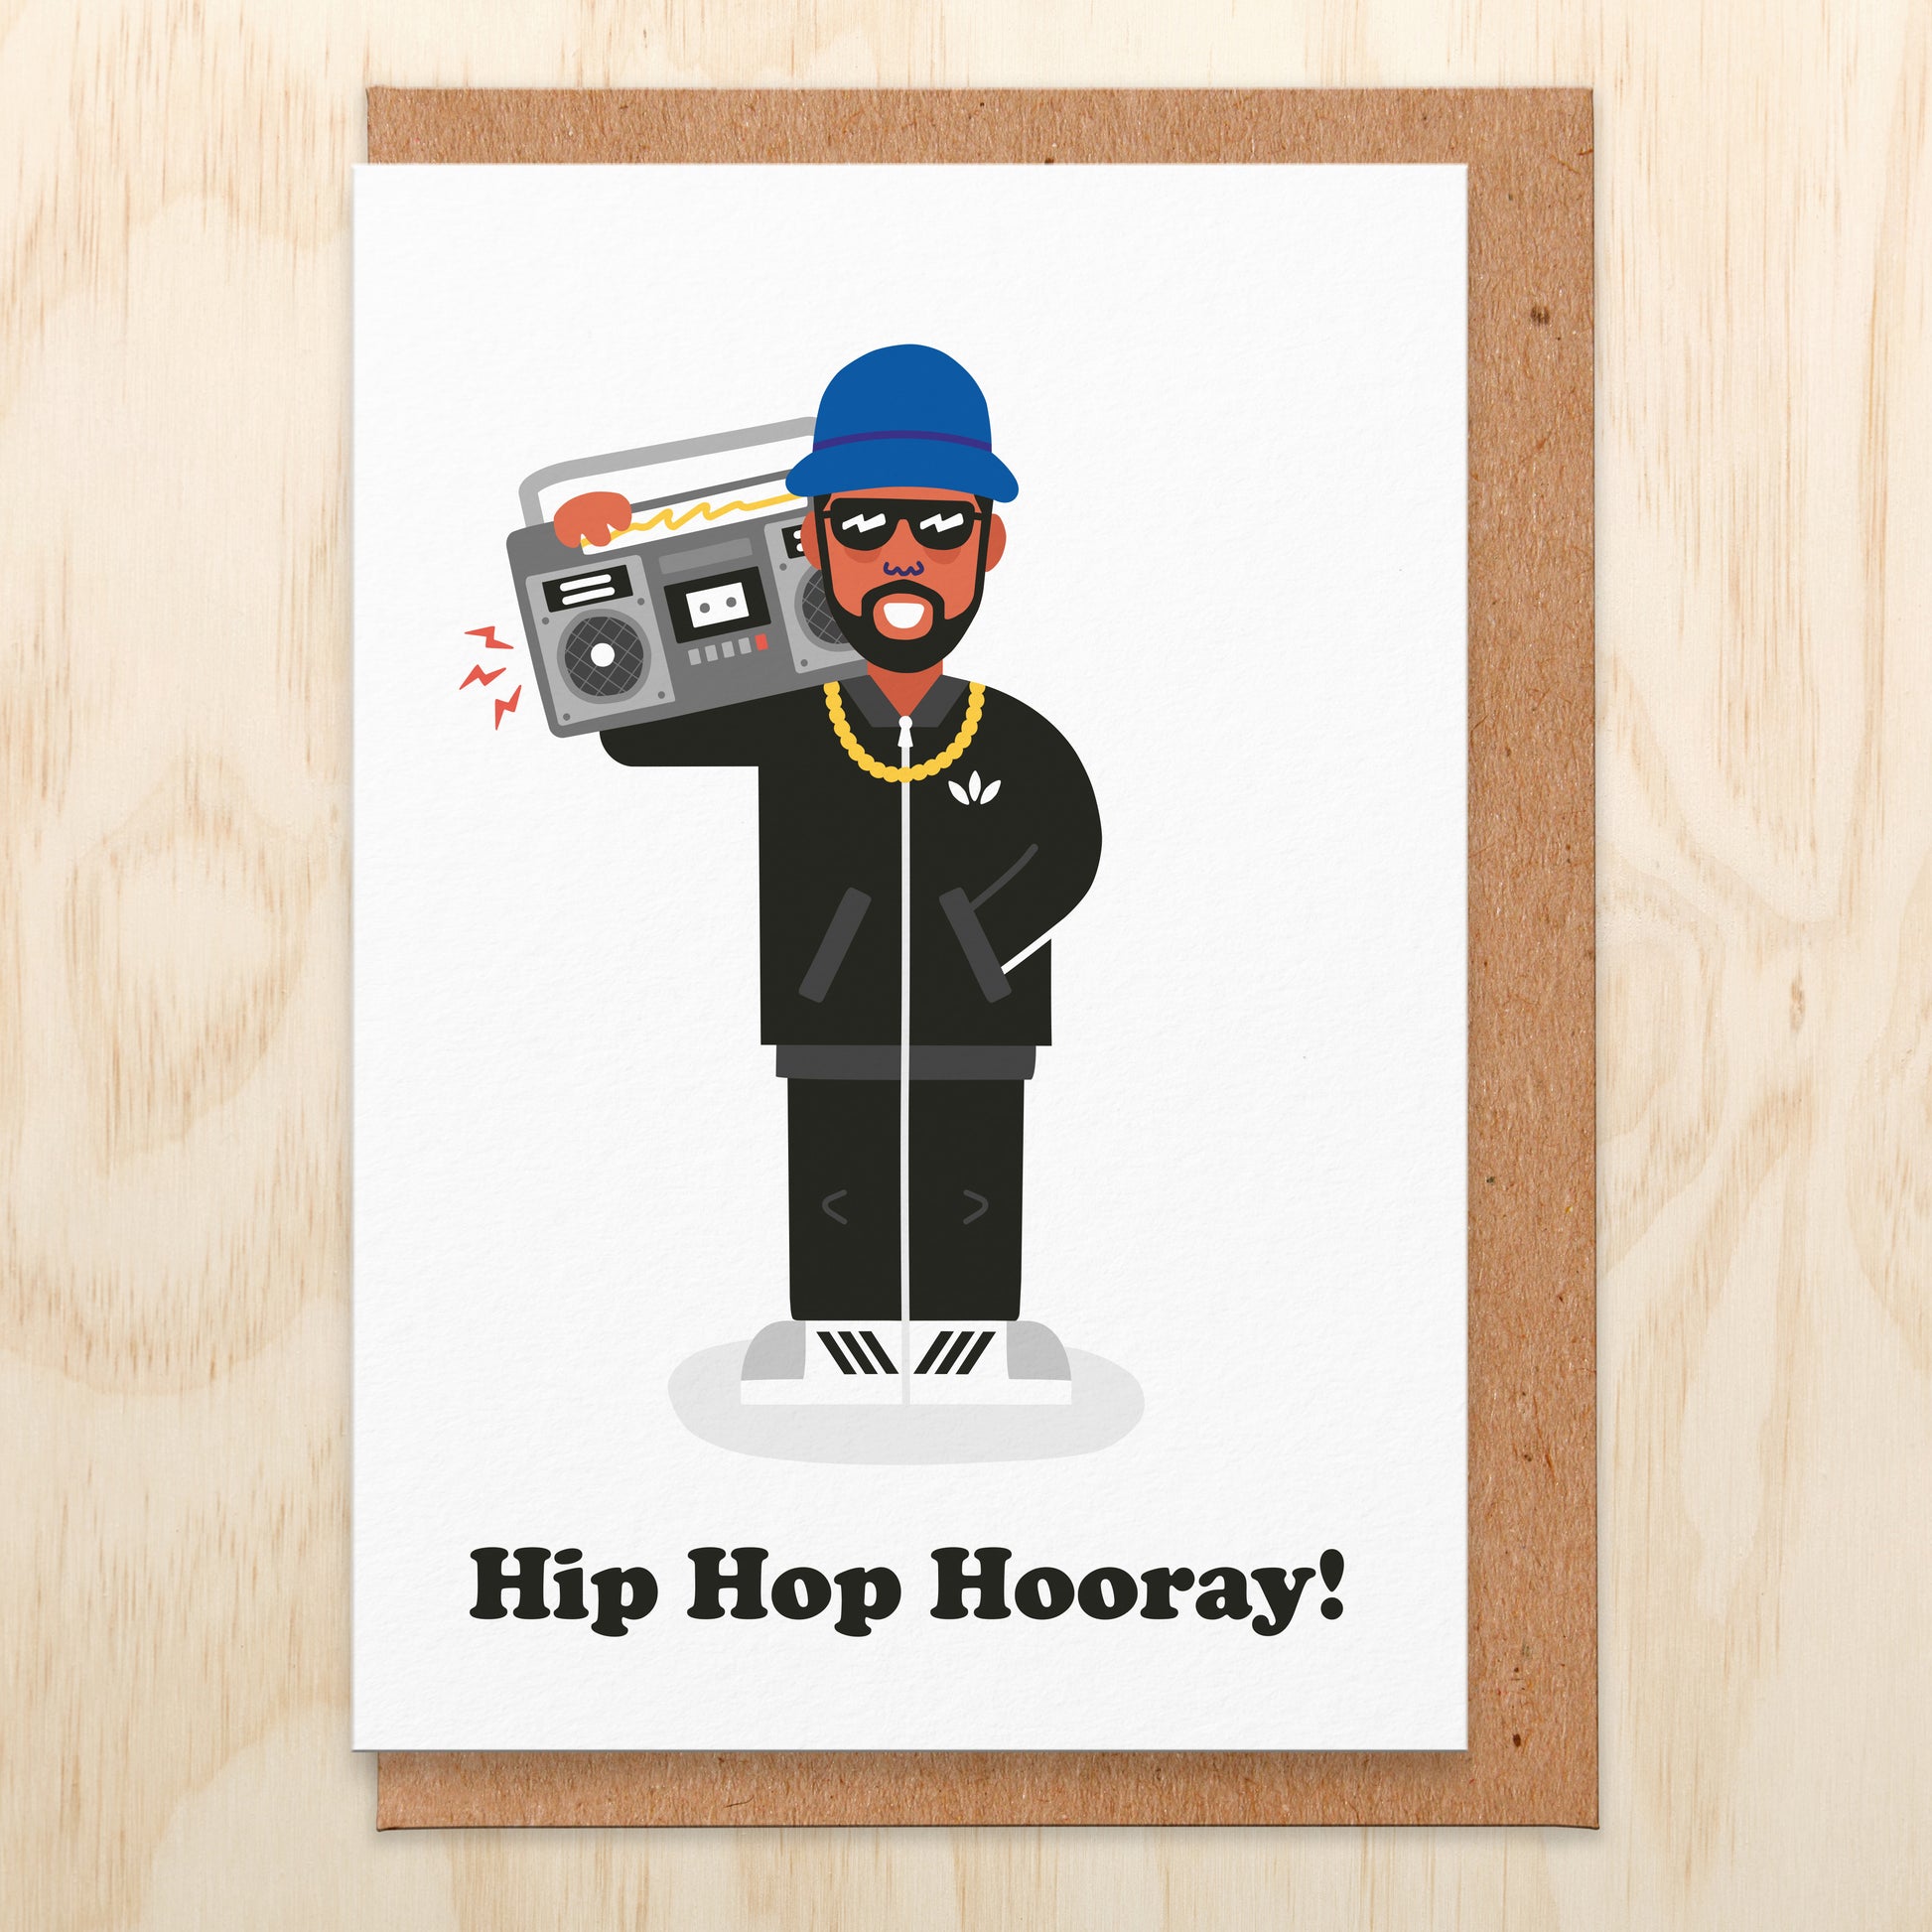 Birthday card that says hip hop hooray with an illustration of a man wearing sunglasses holding a boombox on his shoulder